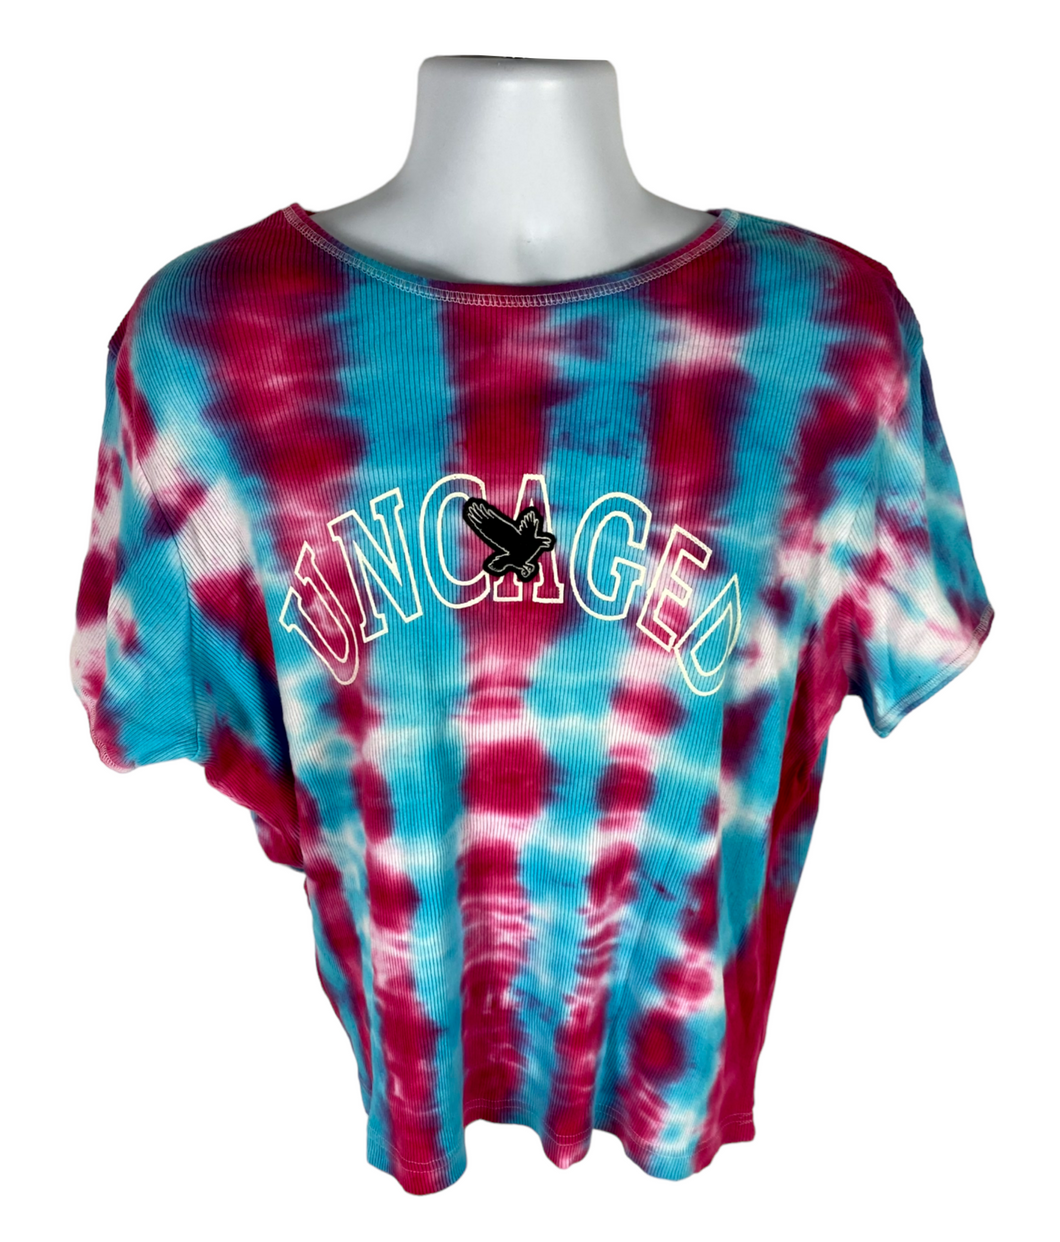 Uncaged Blue & Red Striped Women's  T-Shirt - XL